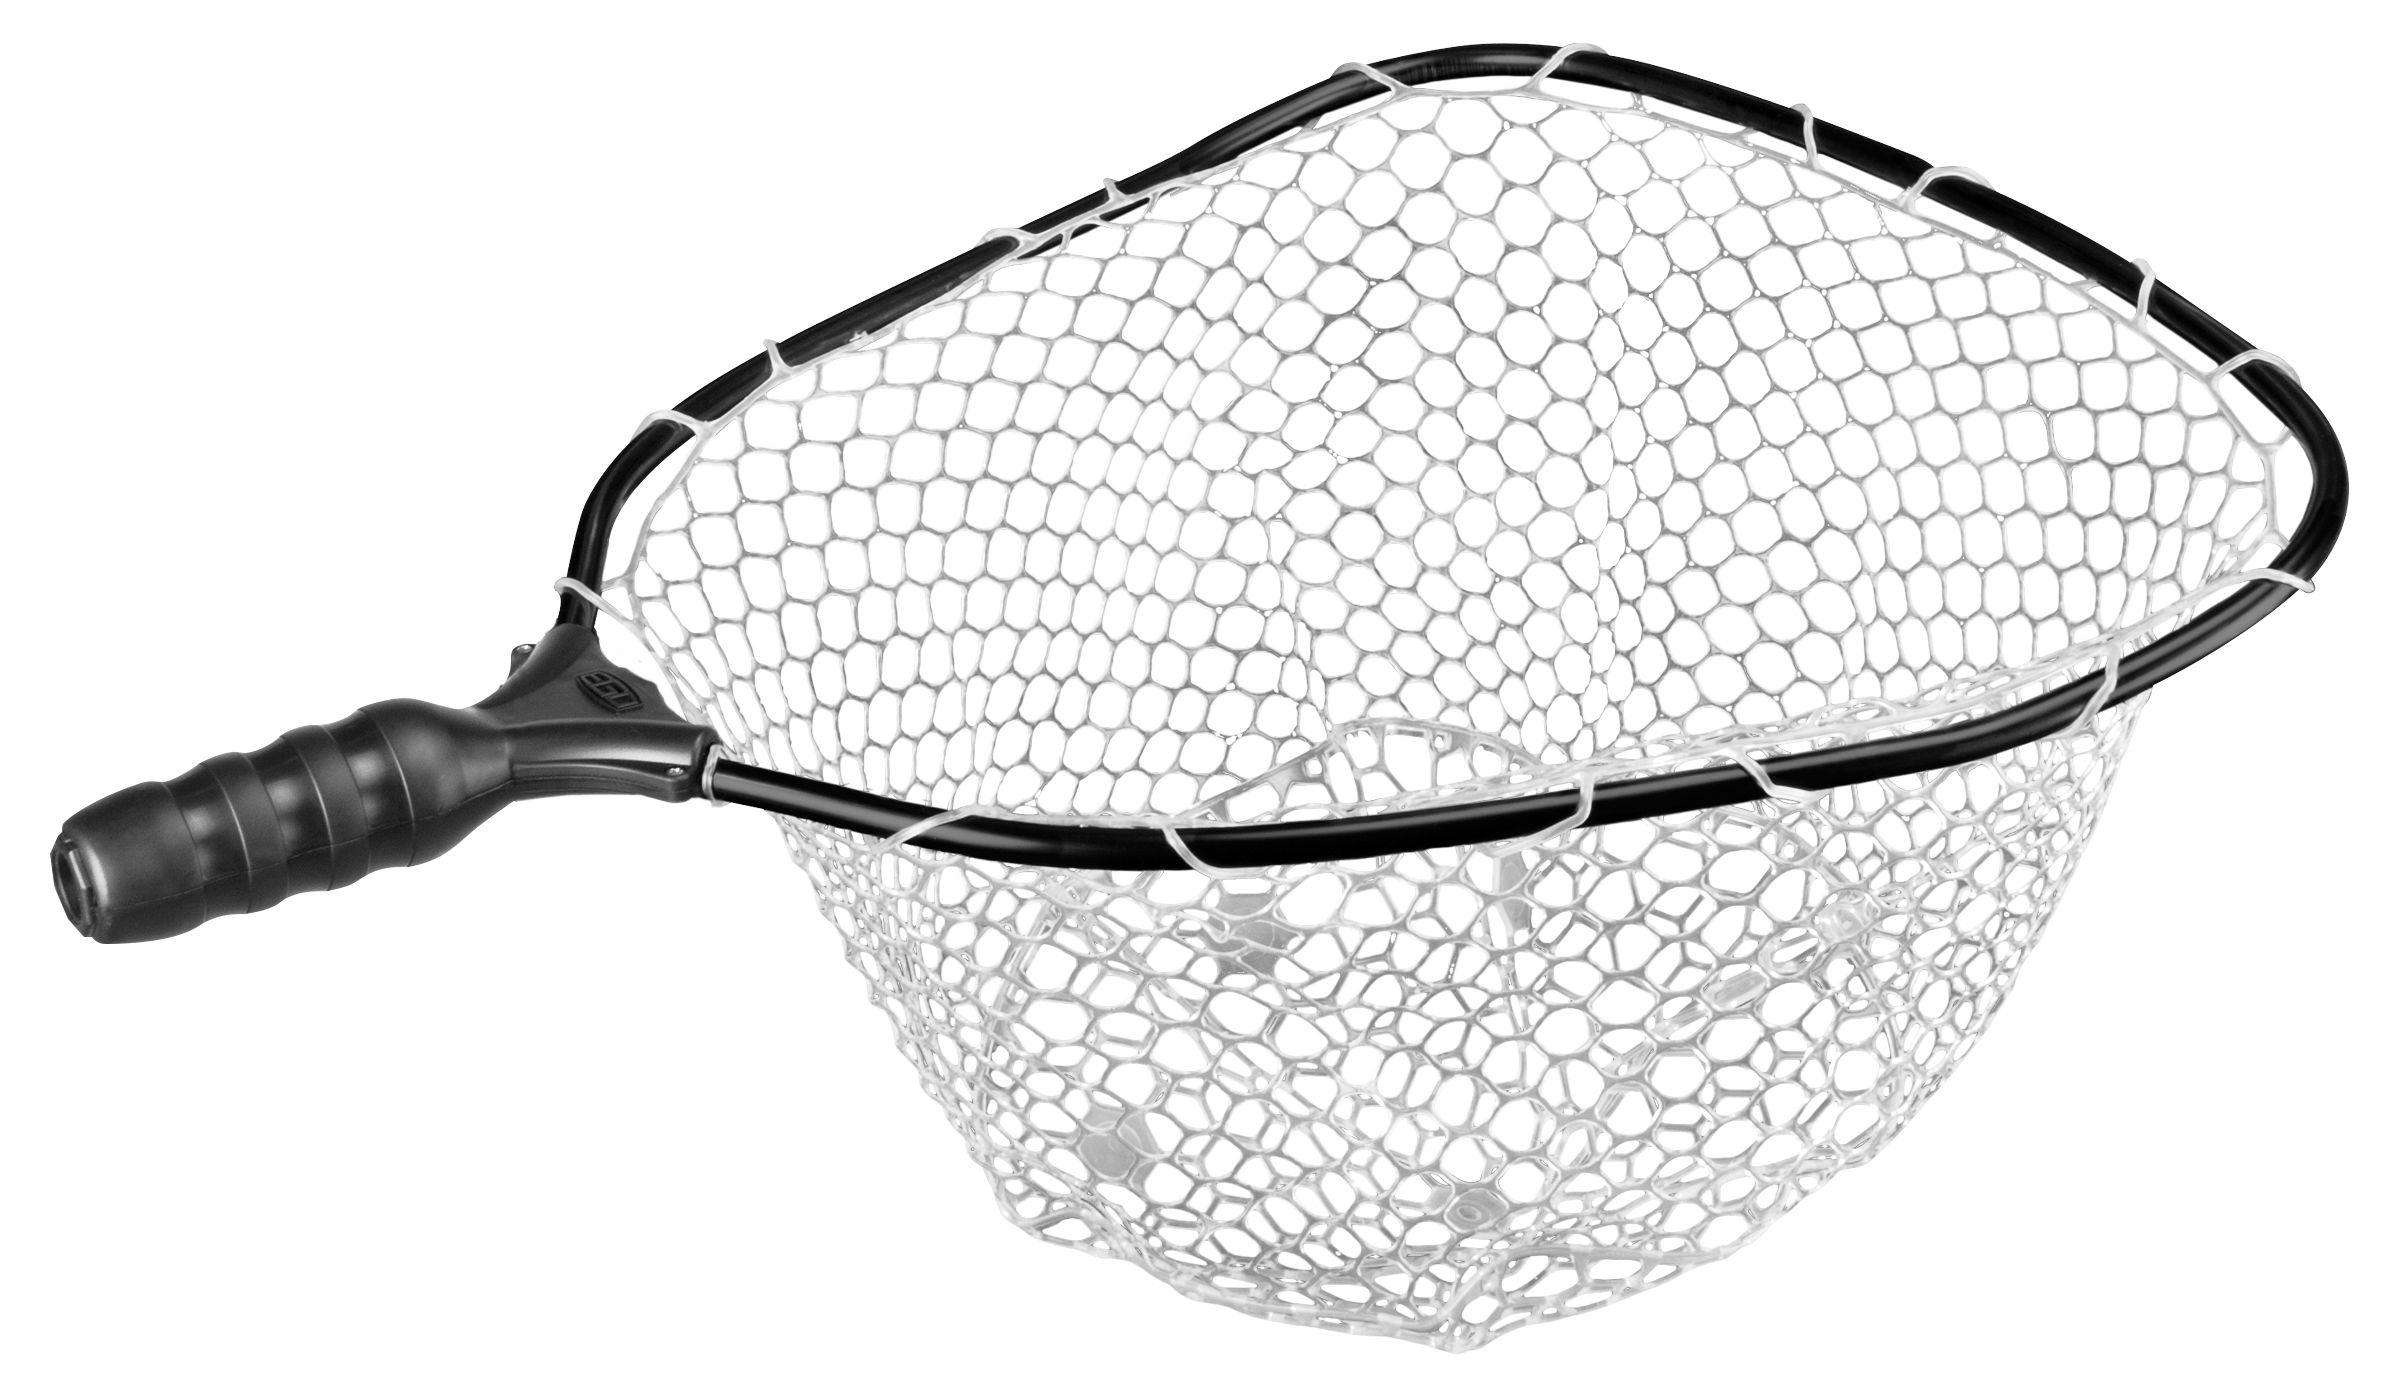 EGO Fishing S2 Large 19in Clear Rubber Net Head 72057A , $3.00 Off